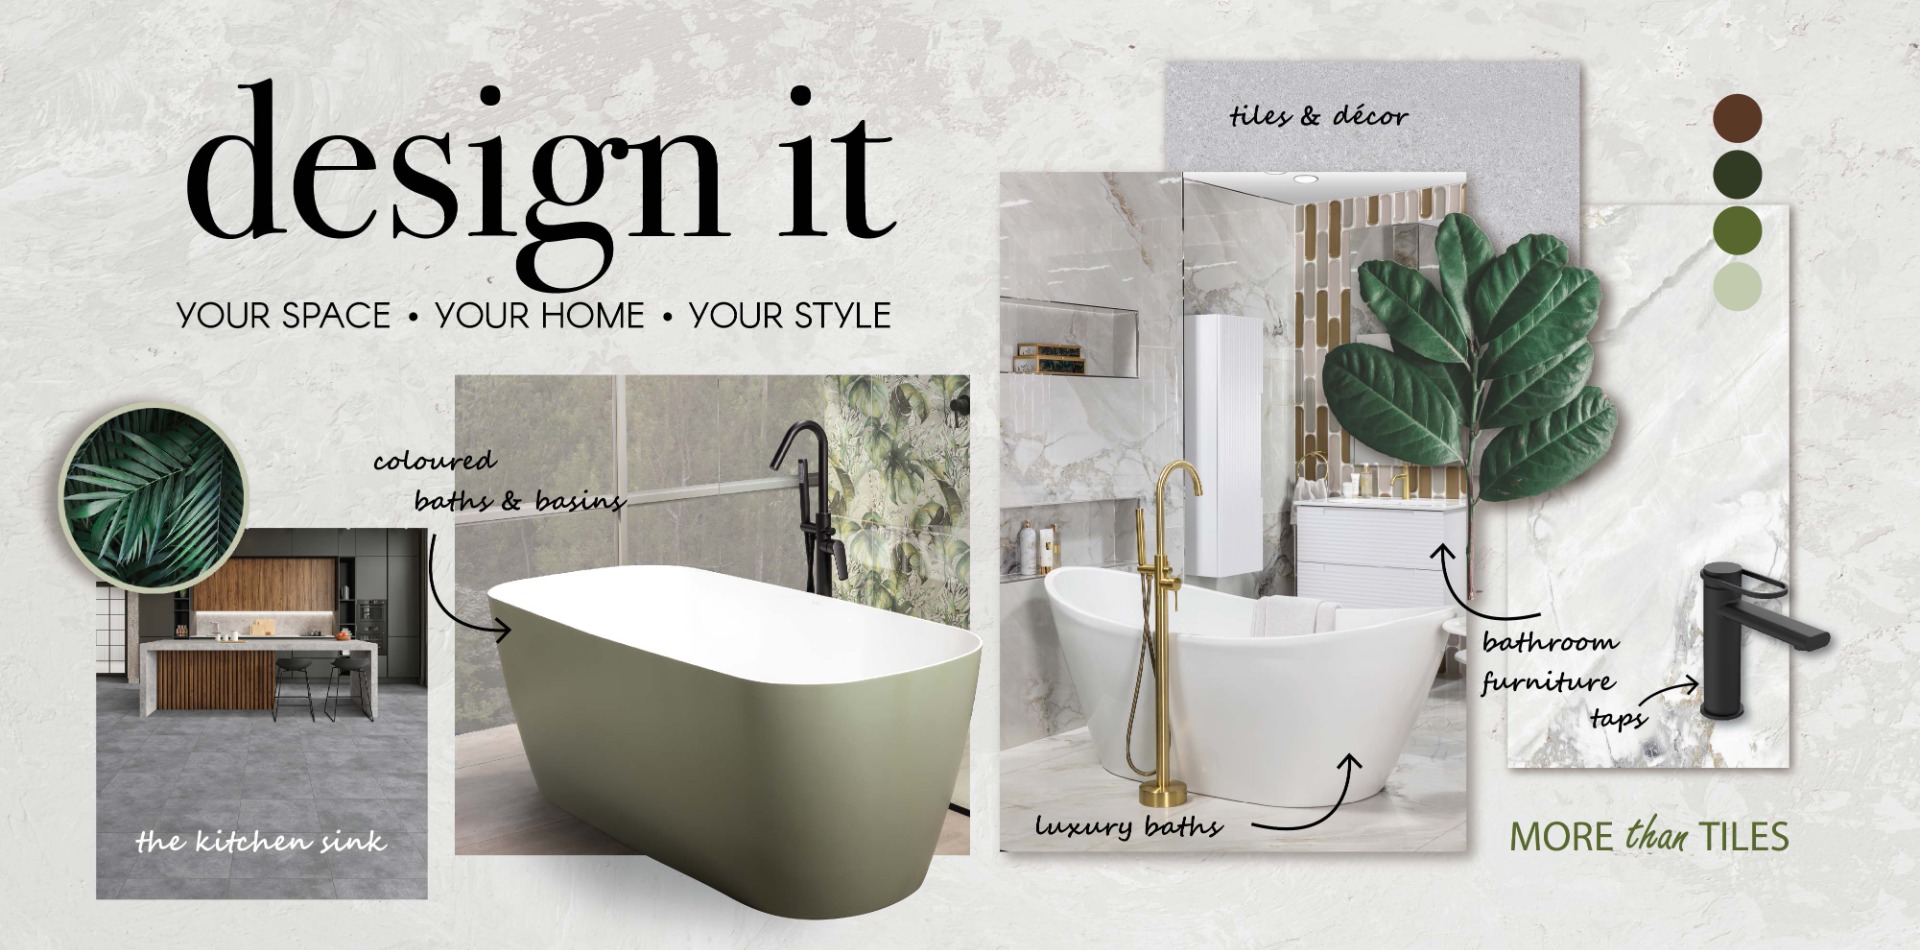 Design It: Your Space. Your Home. Your Style